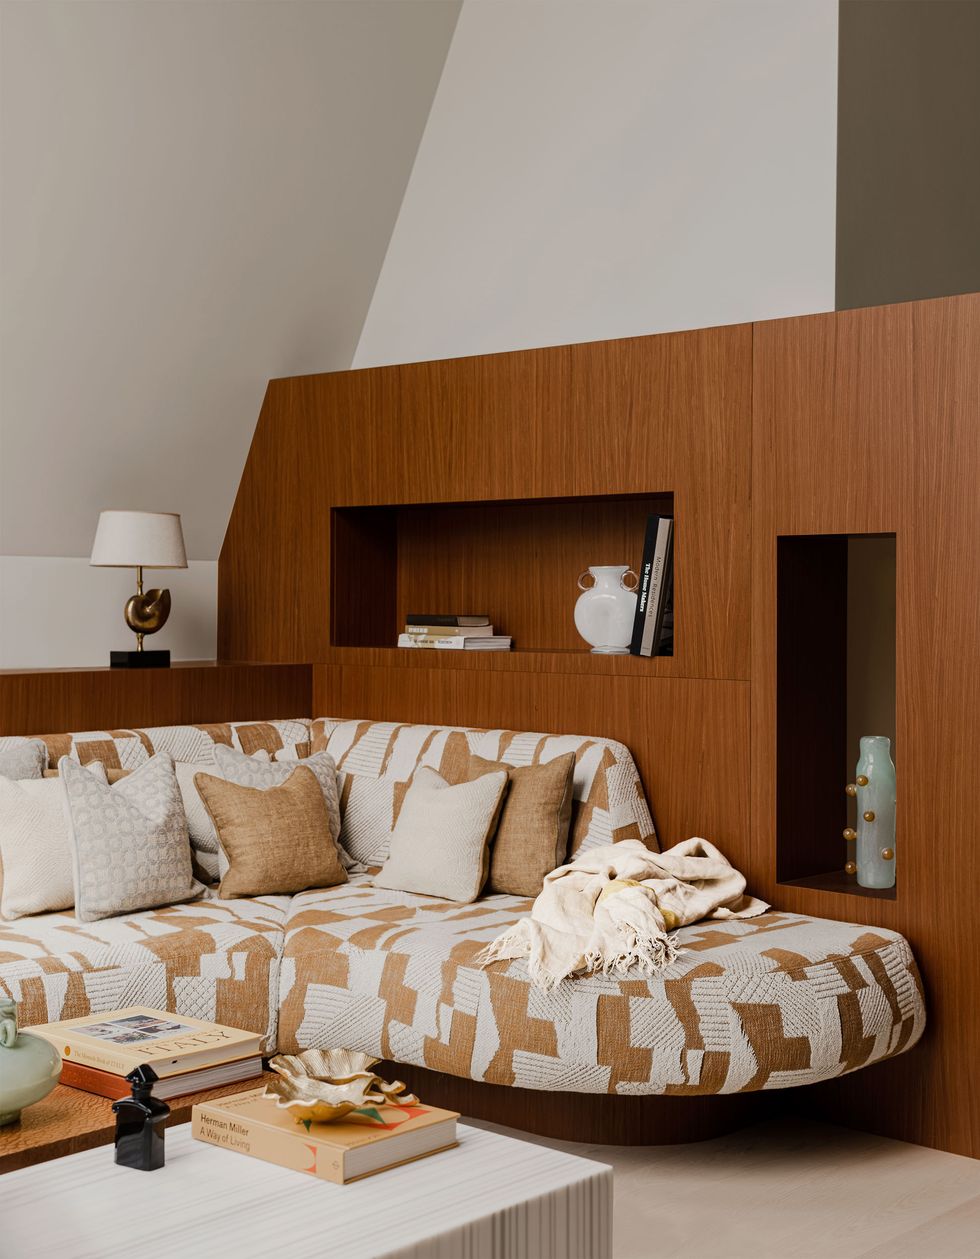 beige and white geometric design rounded sofa up against a dark honey color wall unit with a few cutout shelves and in the foreground are two low tables one white striated and other other textured wood with various objects and books on them